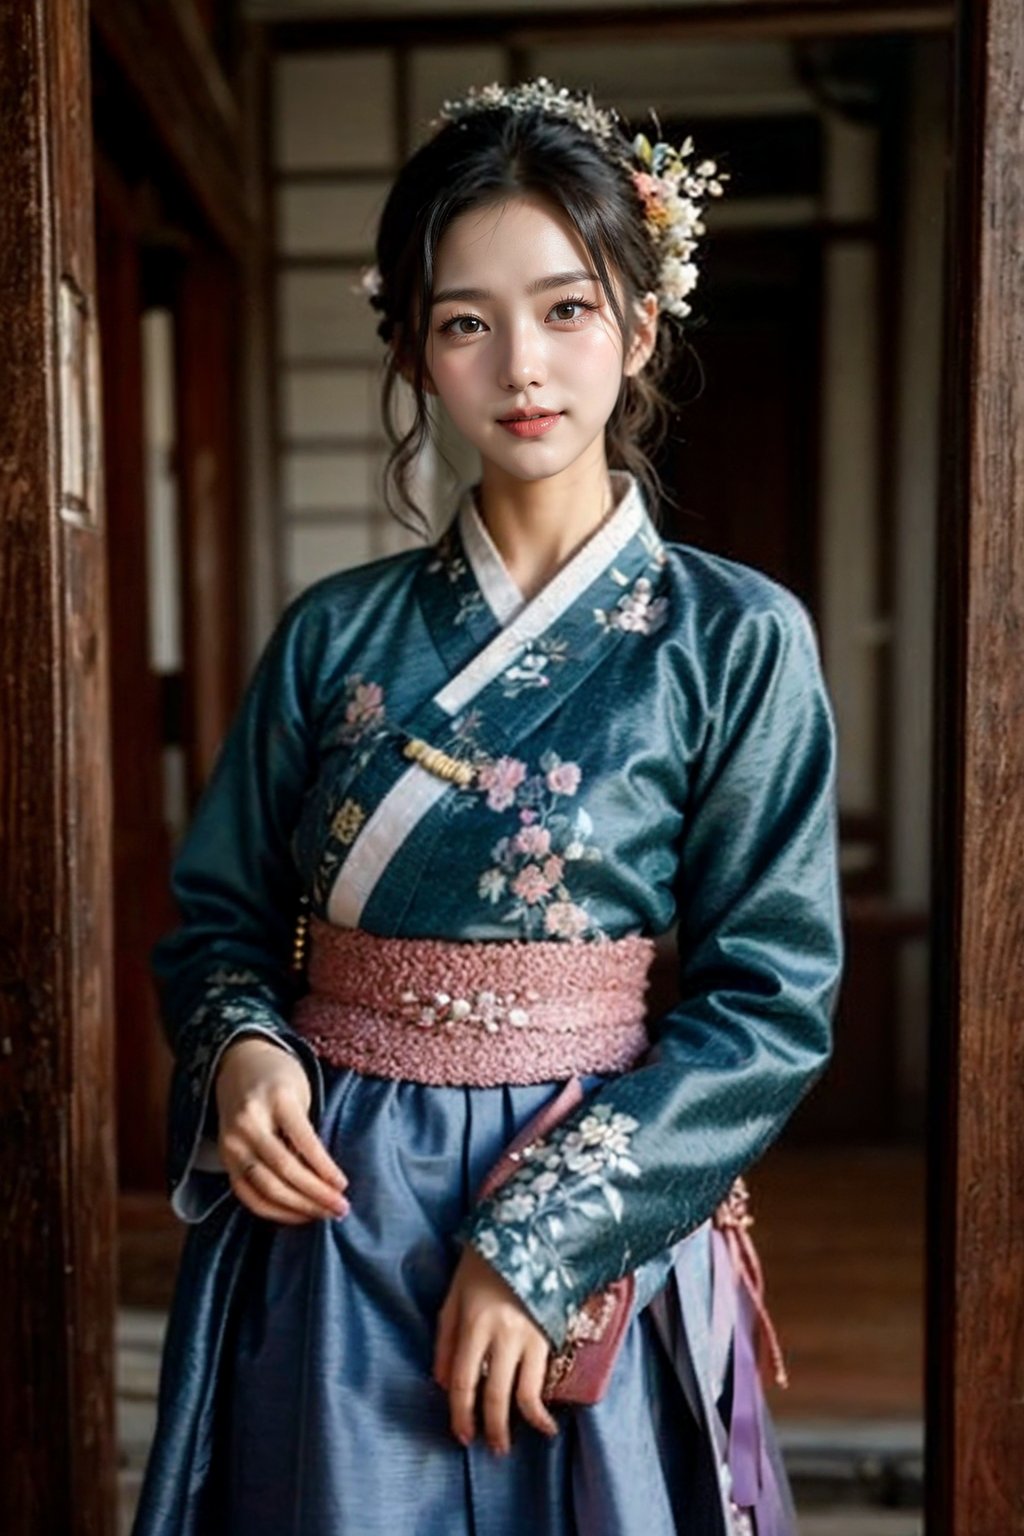 This photo shows a woman wearing traditional Korean clothing. The art style is vivid and realistic, capturing the rich textures and colors of the clothing. The focus is on the woman, who turns slightly towards the camera and smiles softly. Her hanbok consists of a beautifully embroidered blue top and a pink skirt. She wore a traditional hair accessory on her neatly styled hair. The background shows detailed traditional Korean architecture, including wooden columns and ornately painted ceilings. The overall composition emphasizes cultural heritage and elegance.